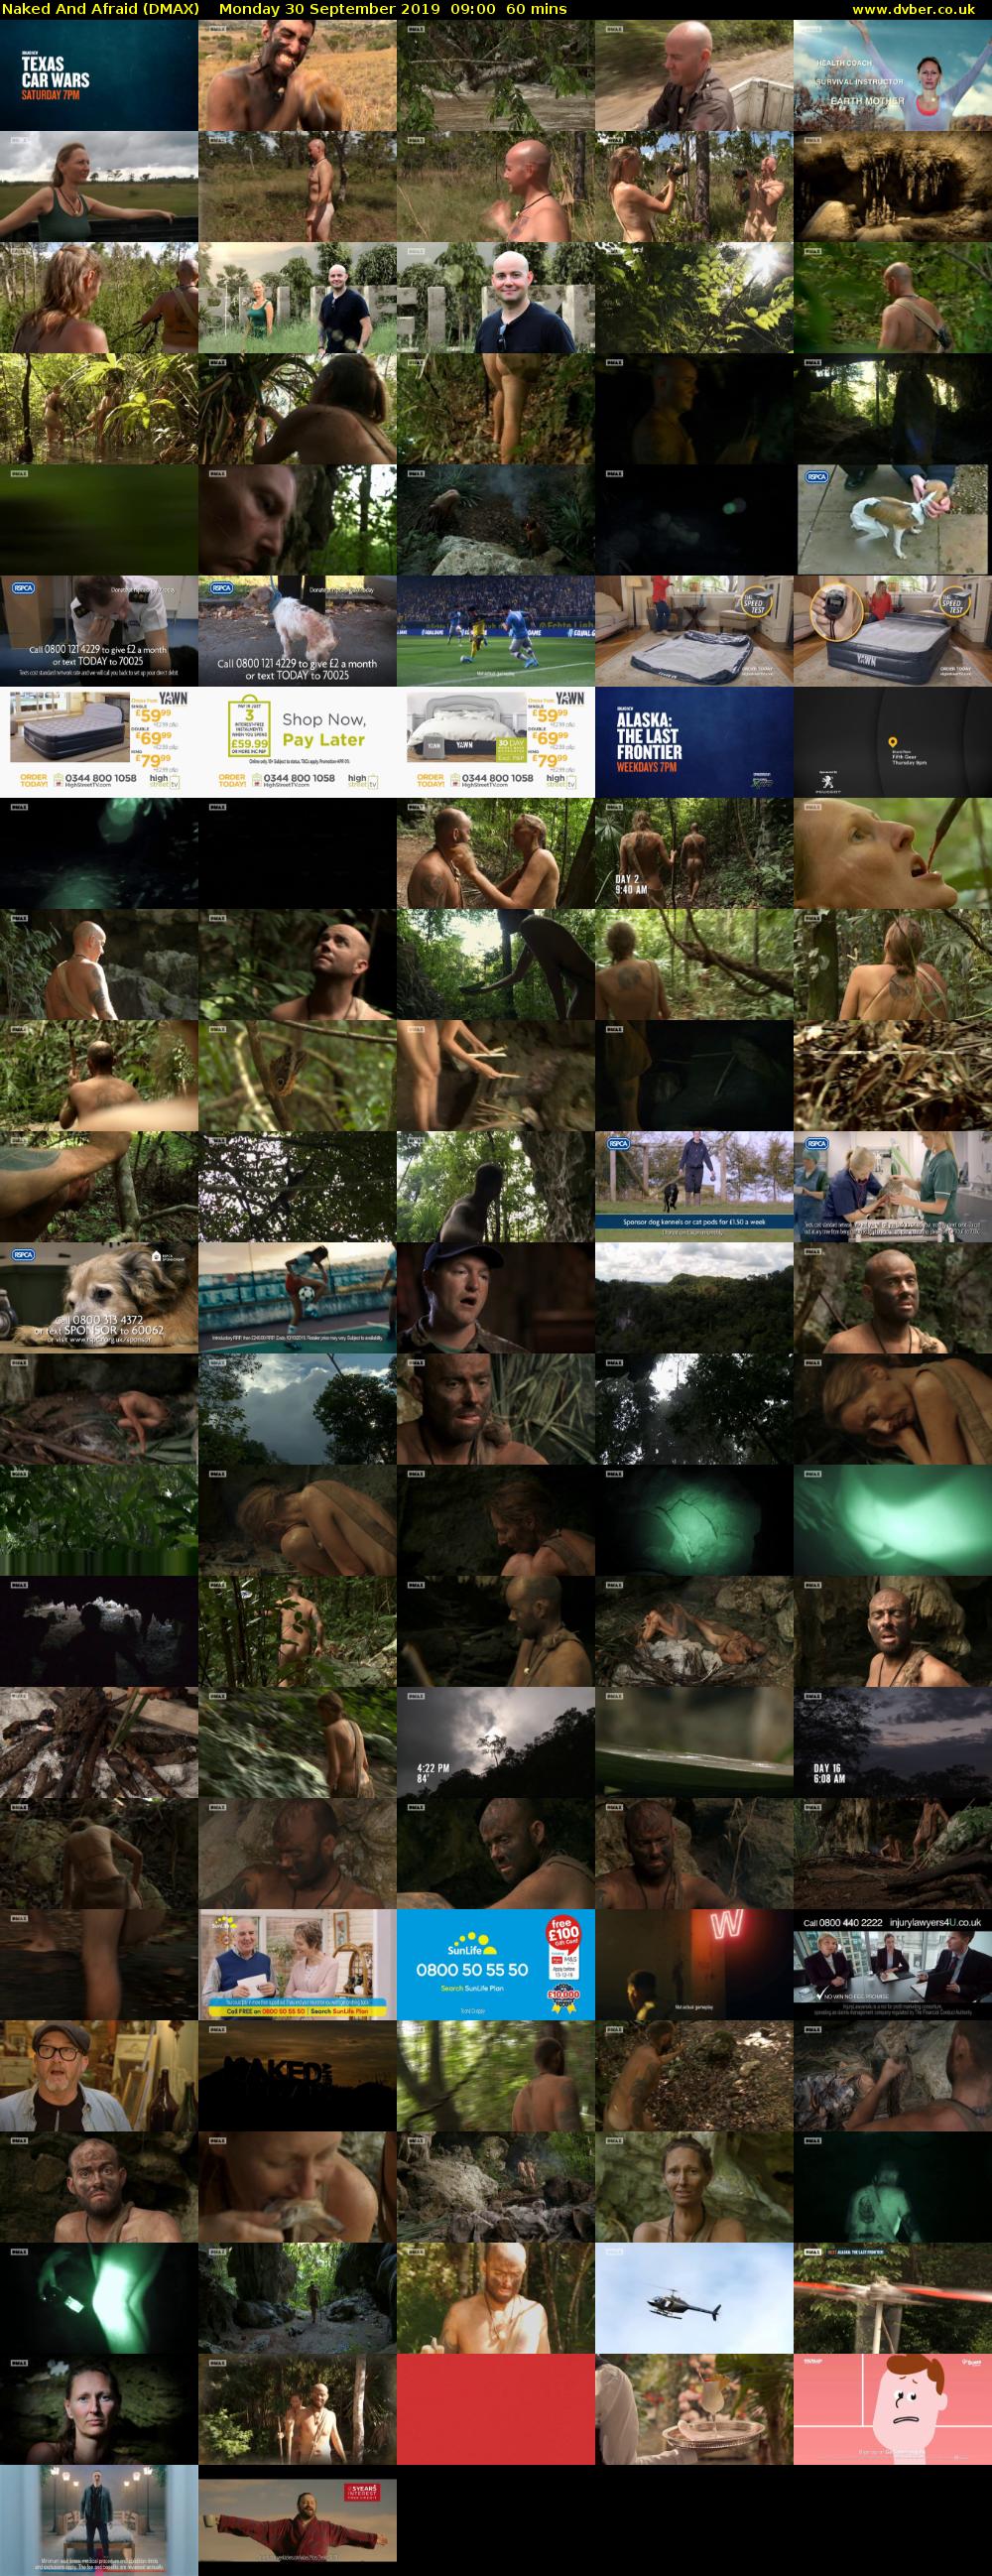 Naked And Afraid (DMAX) Monday 30 September 2019 09:00 - 10:00